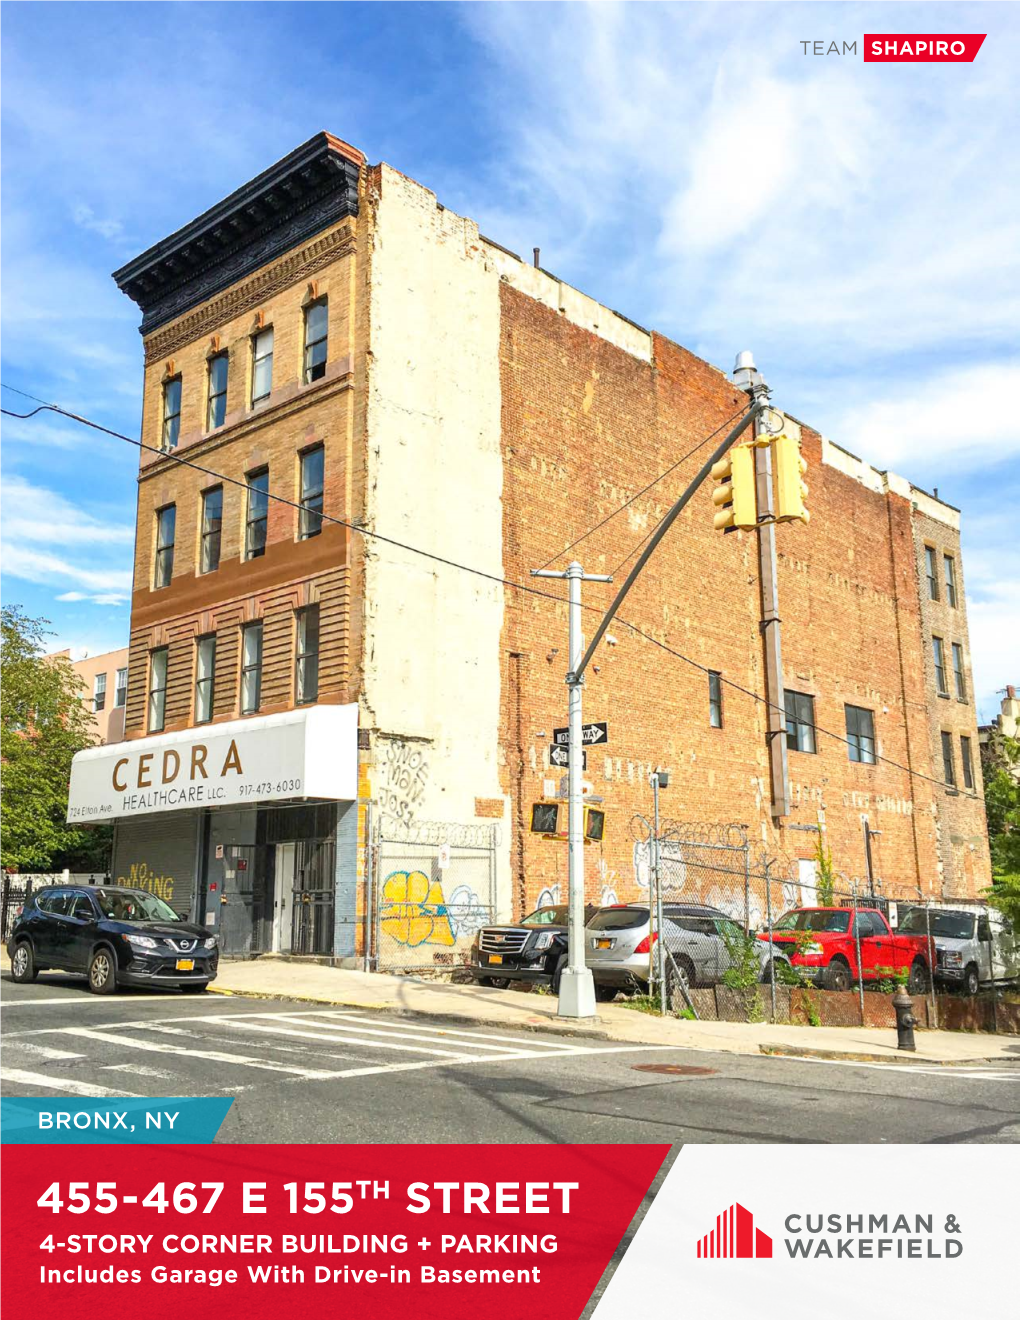 455-467 E 155TH STREET 4-STORY CORNER BUILDING + PARKING Includes Garage with Drive-In Basement 455-467 EAST 155TH STREET - PROPERTY OVERVIEW